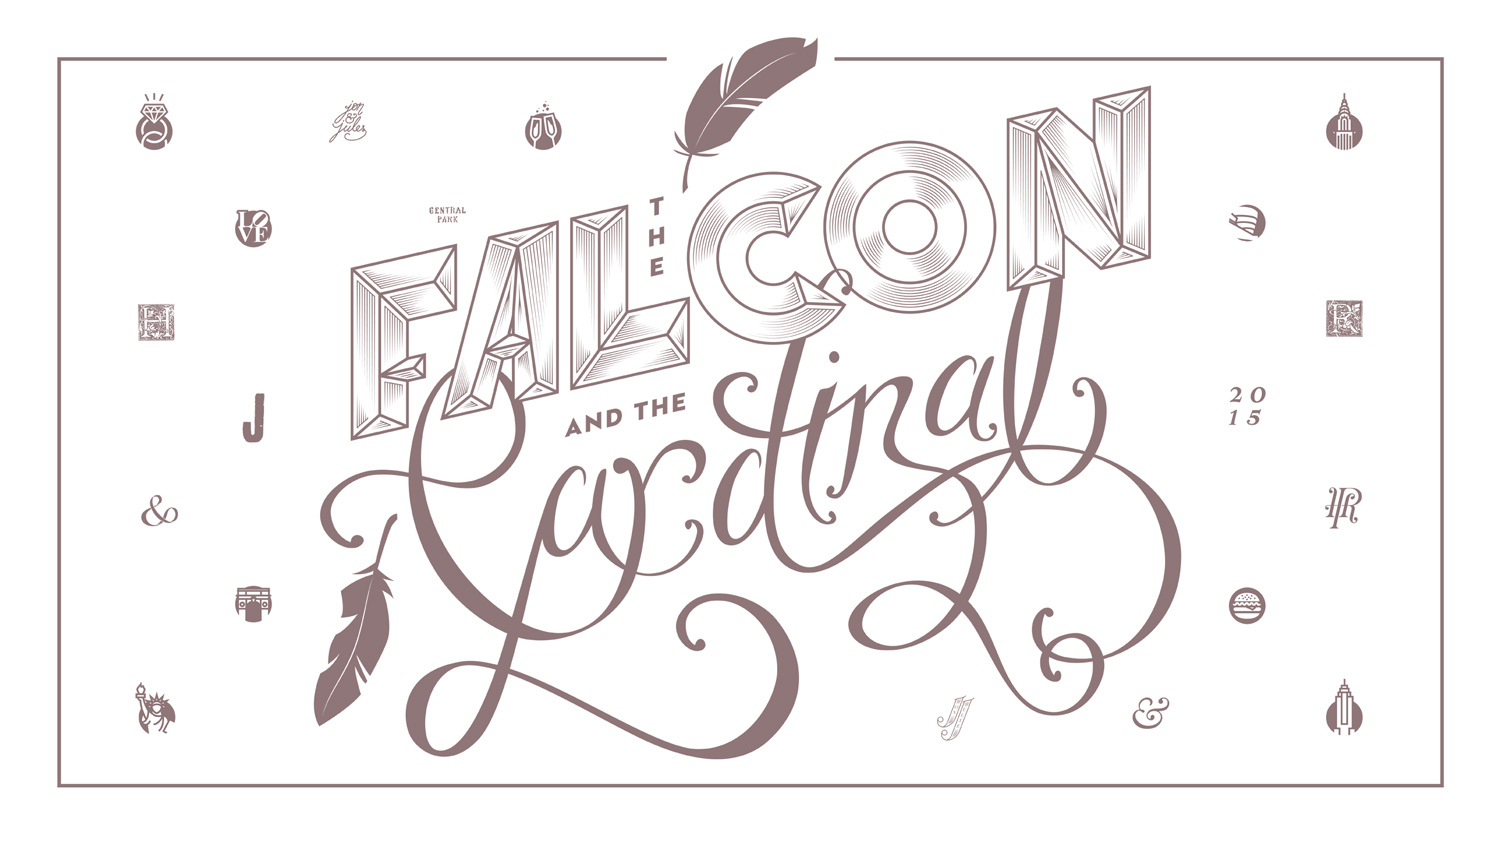 The Falcon and the Cardinal